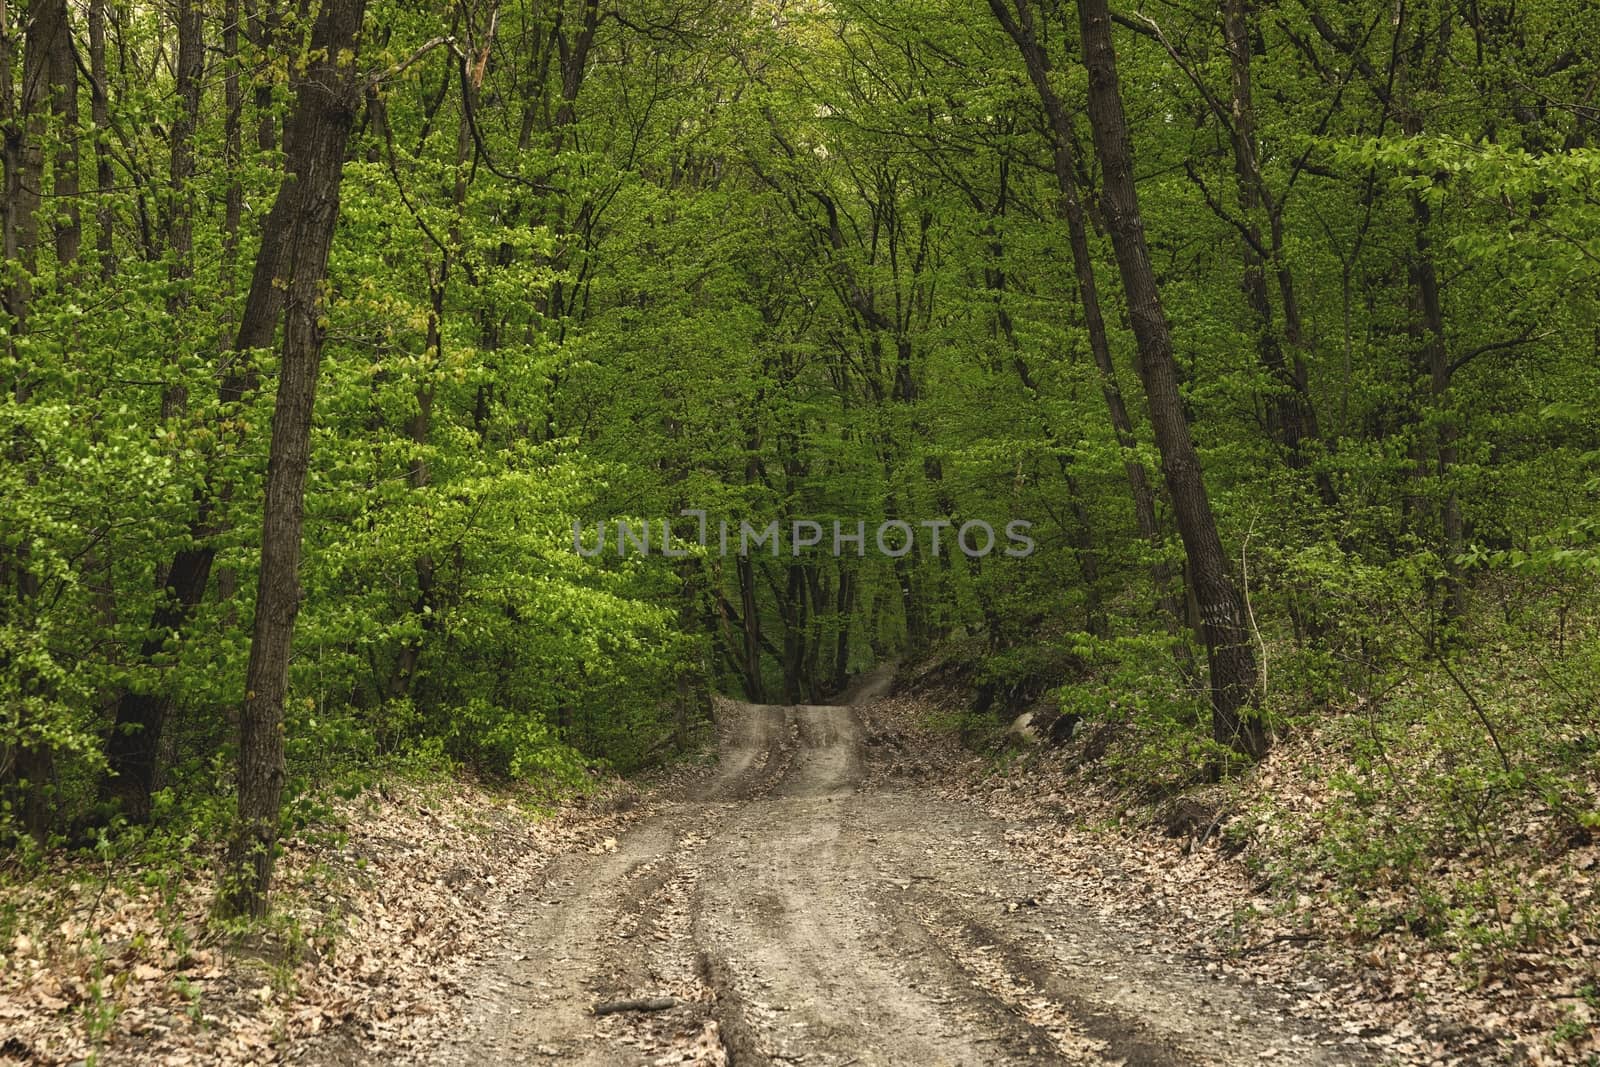 Road in the forest with green lush trees